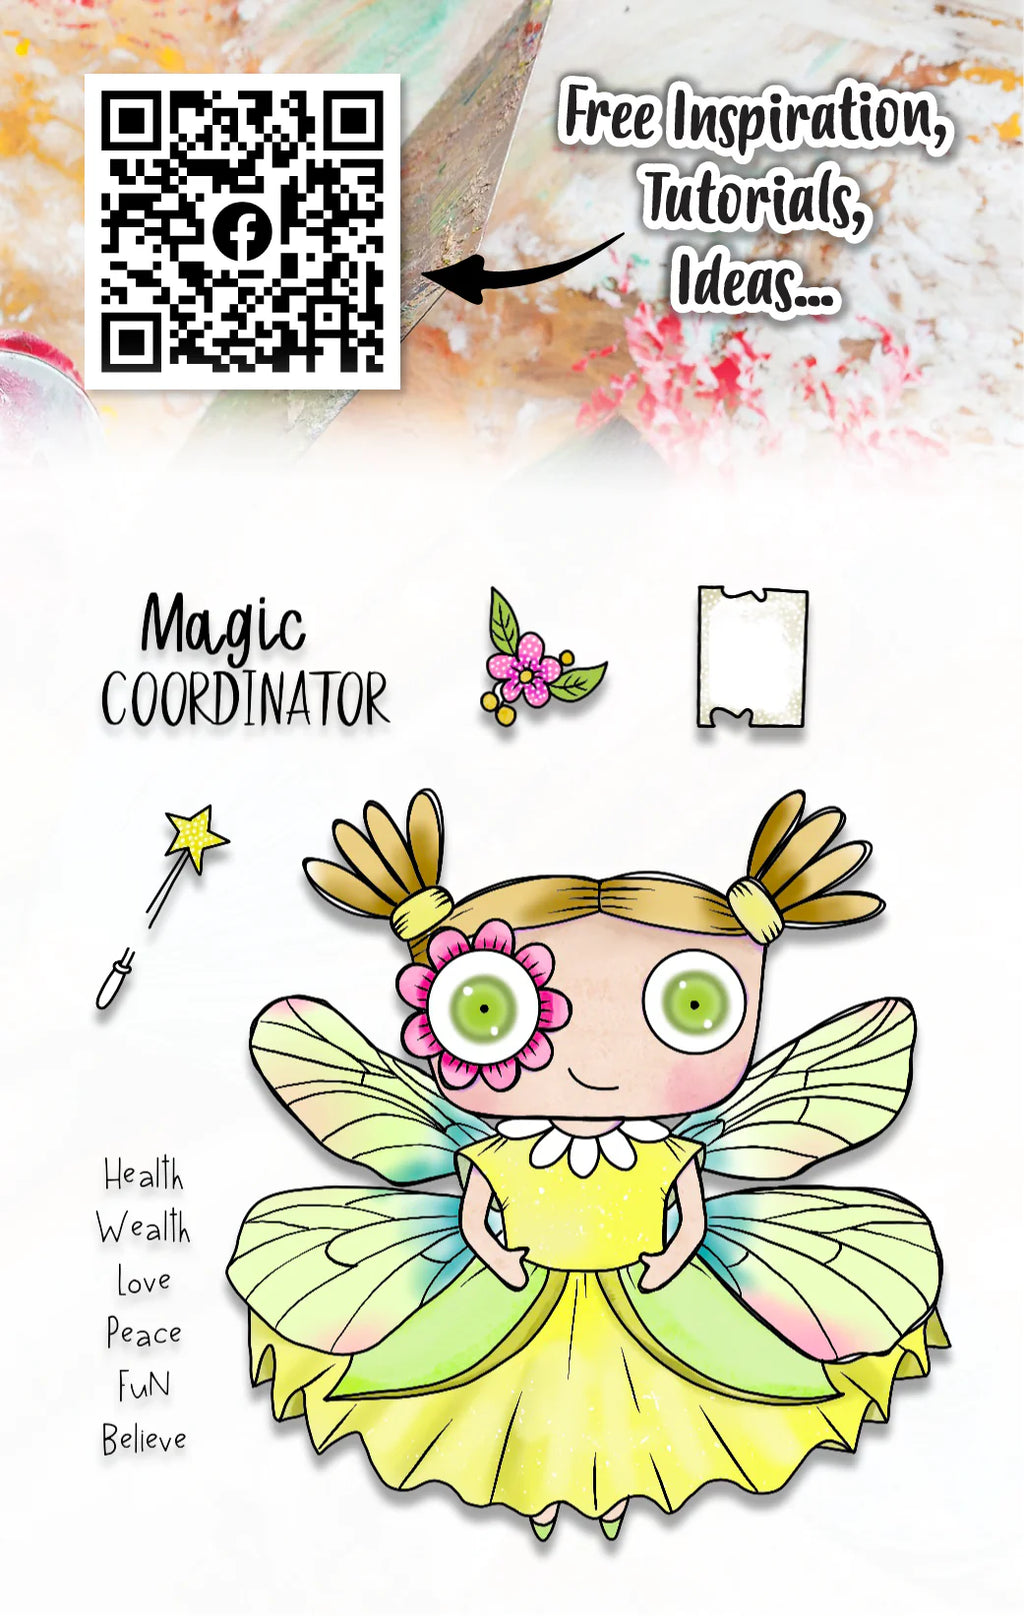 AALL & Create - A7 - Clear Stamps - 1167 - Janet Klein - Magic Coordinator